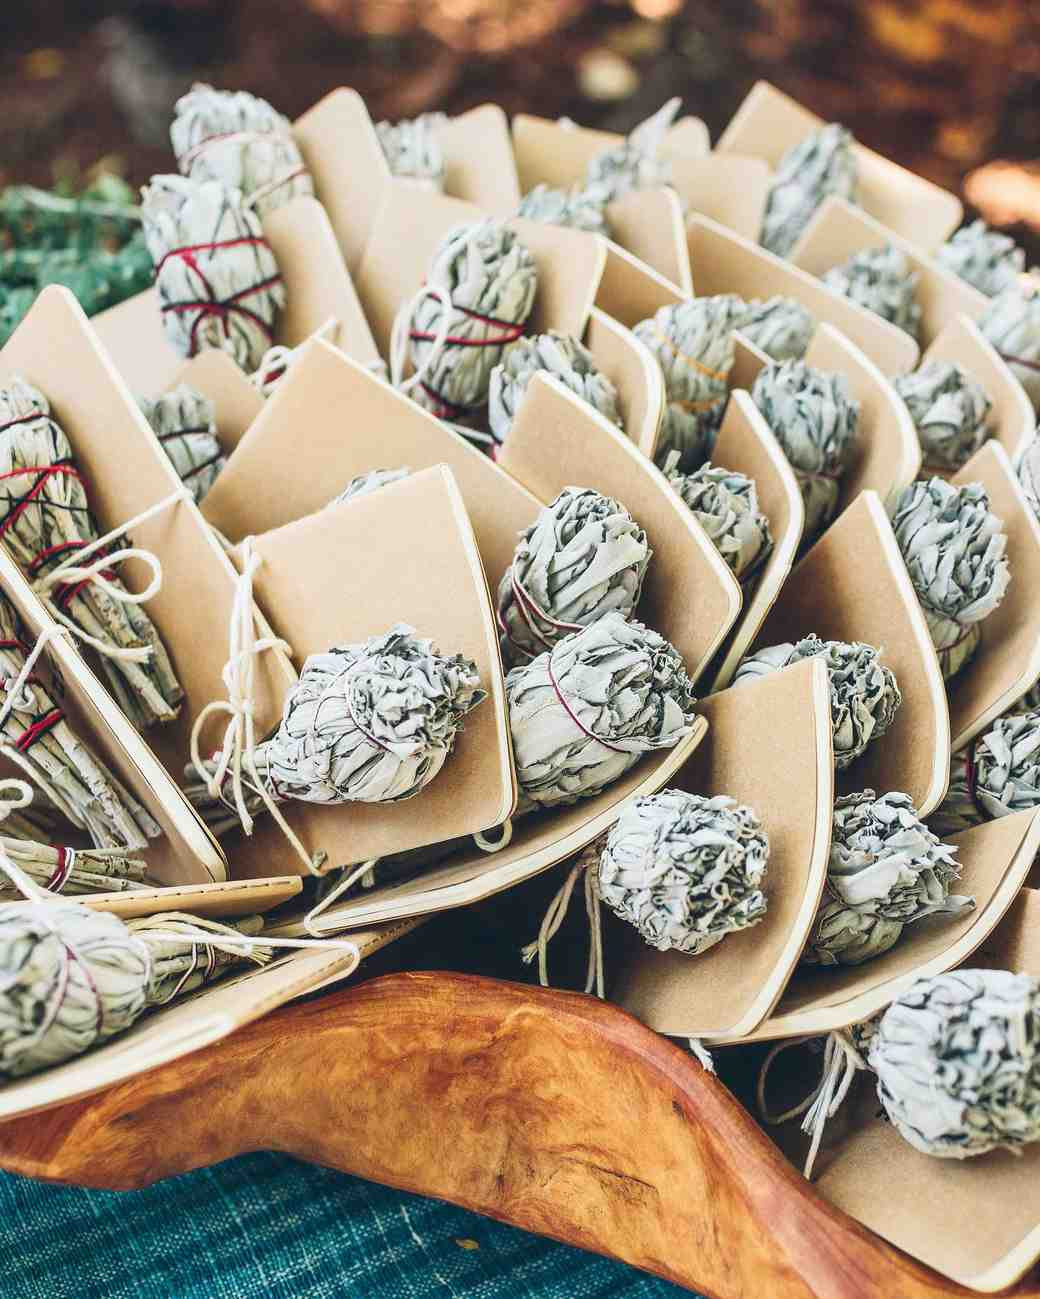 Unusual Wedding Favors
 50 Creative Wedding Favors That Will Delight Your Guests